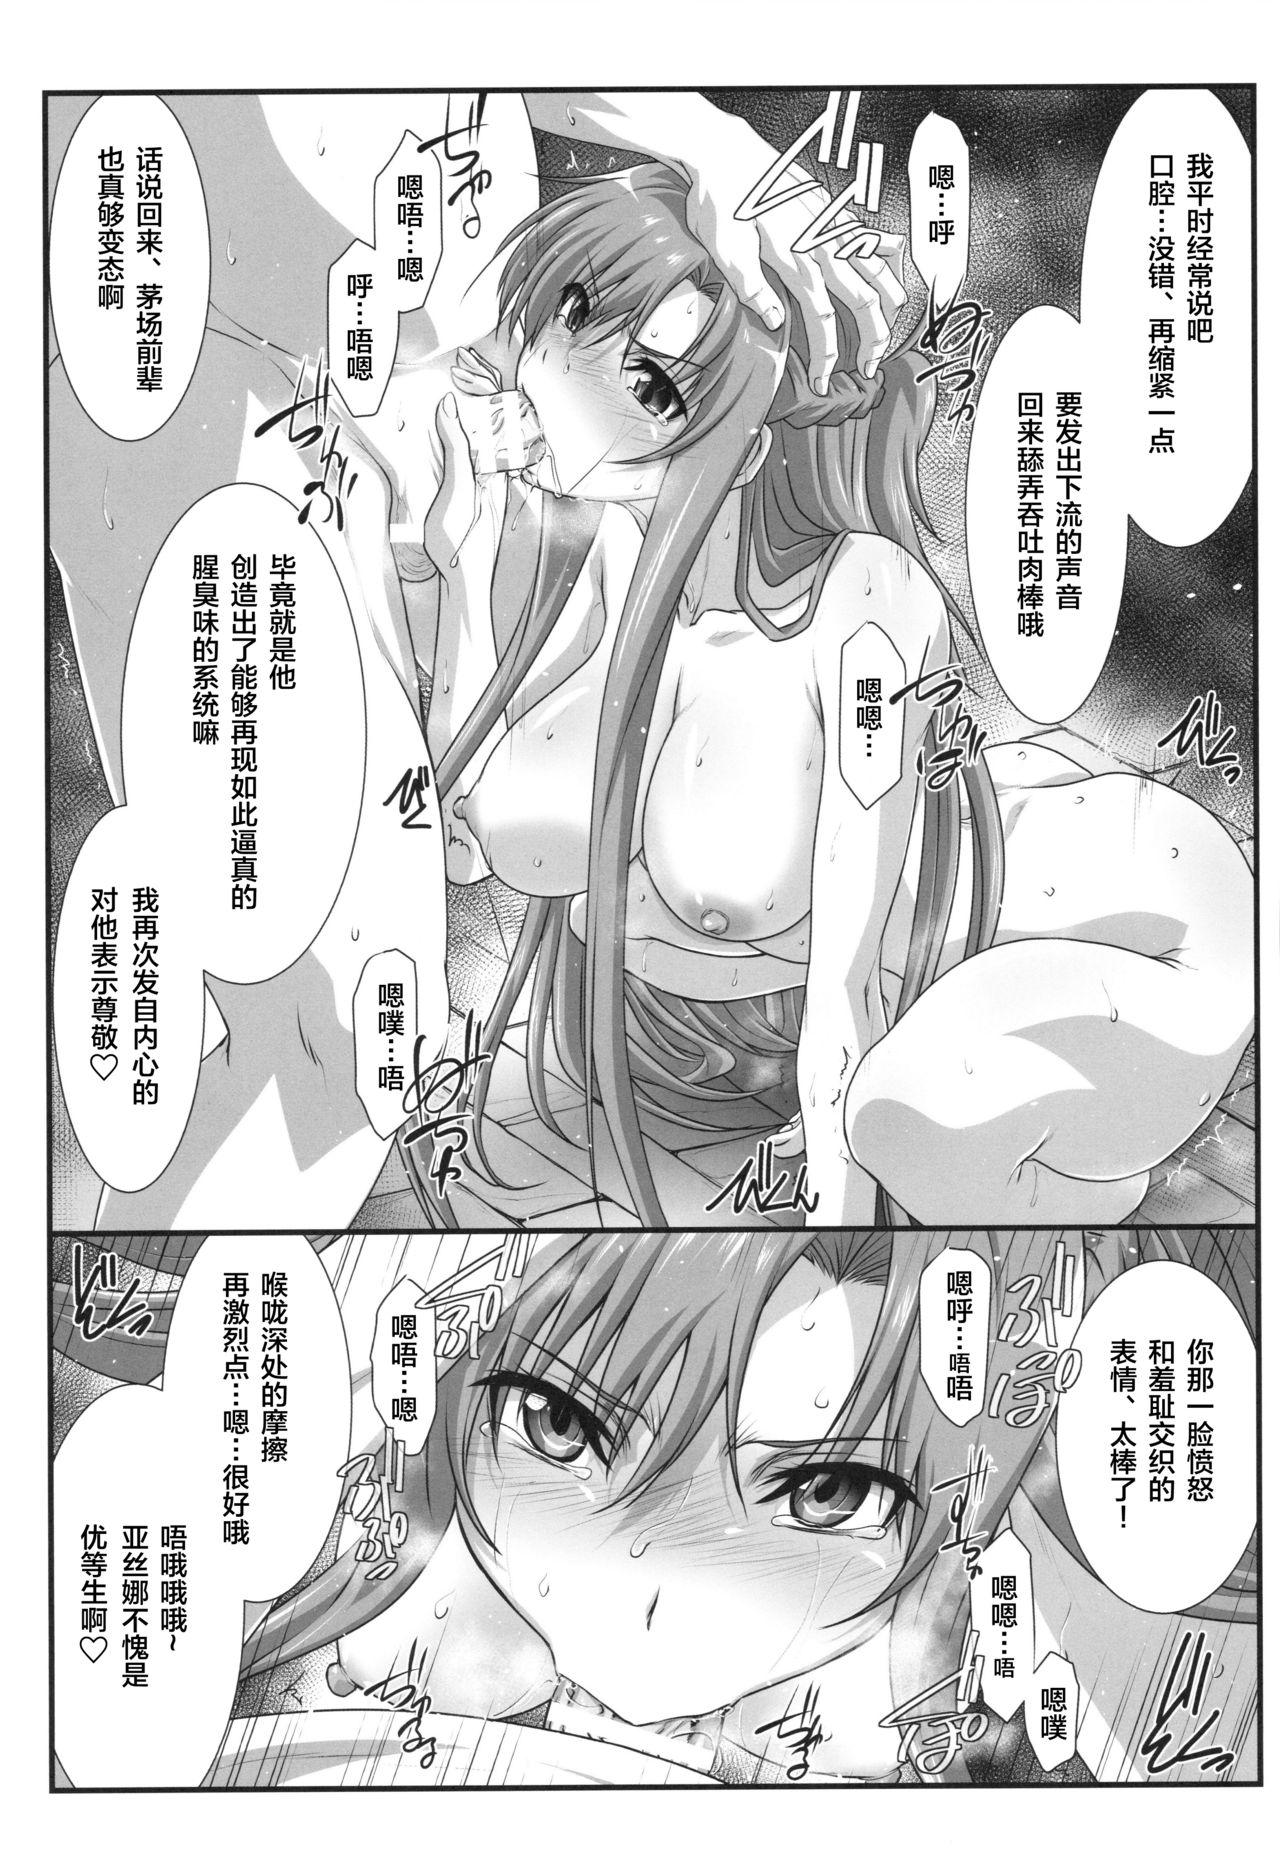 Porn Astral Bout Ver. 41 - Sword art online Throatfuck - Page 6